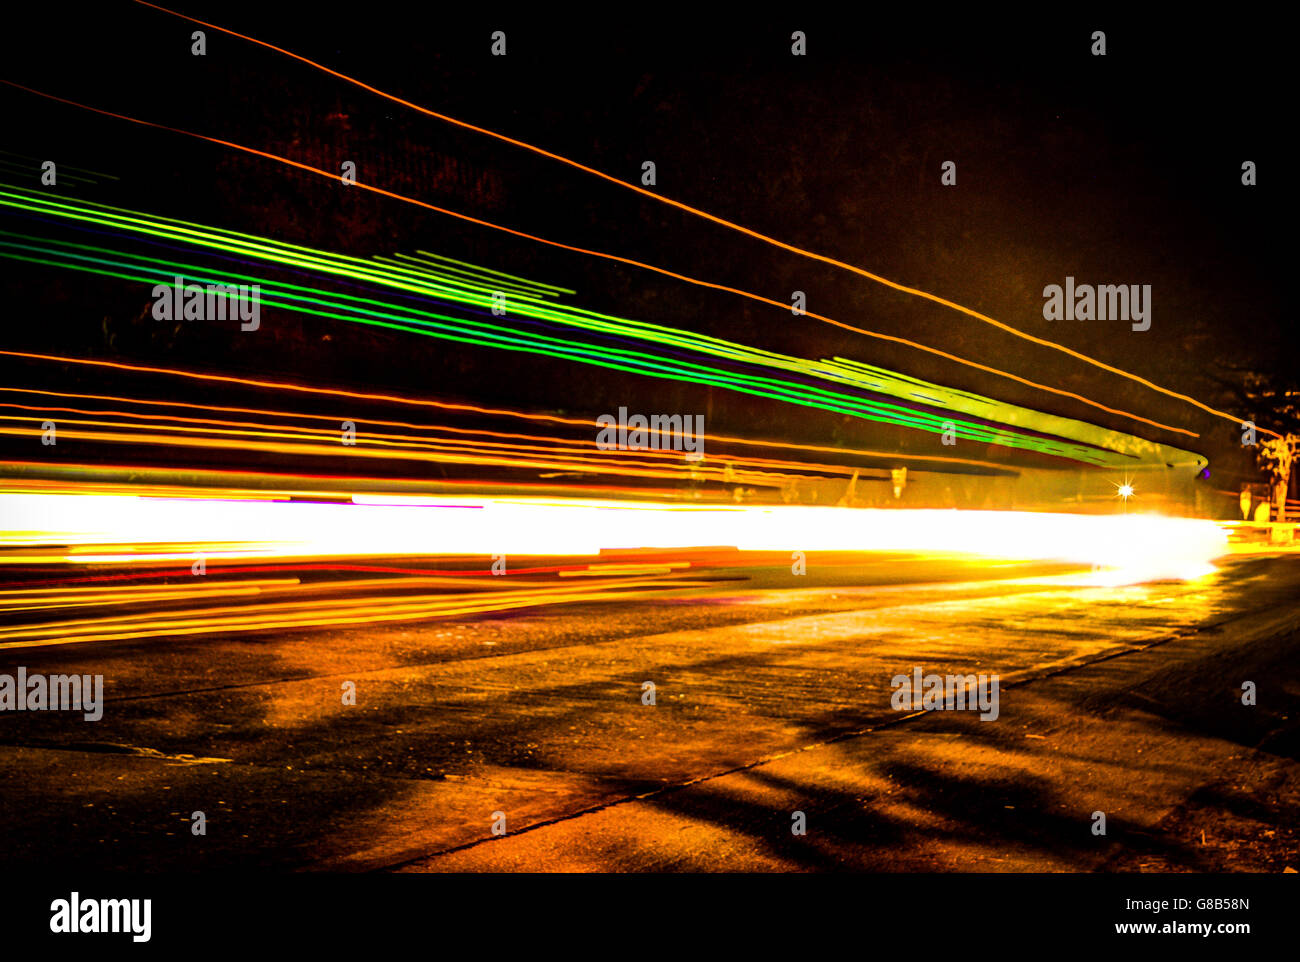 Car trails at night Stock Photo